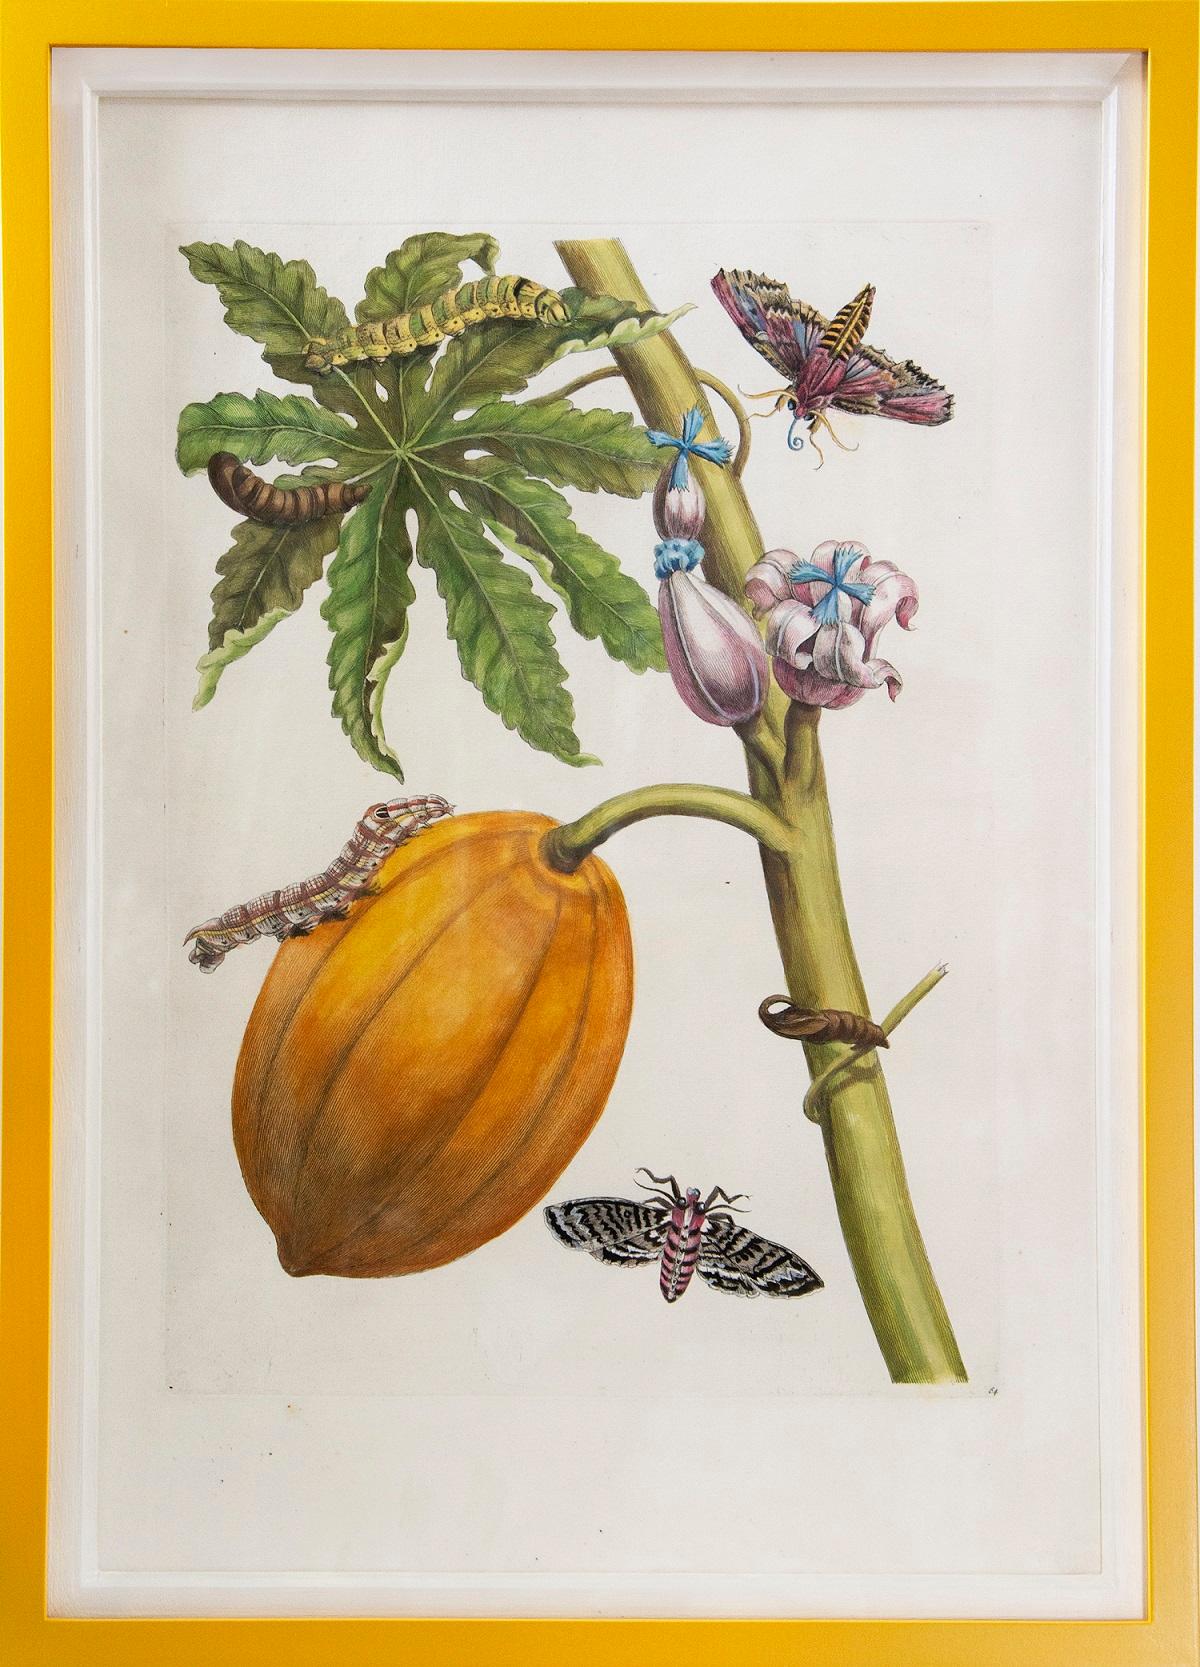 [MERIAN, Maria Sibyl]. 
A Group of Six Flowers, Insects and Fruits.  
The Hague, Gosse, 1719. 
A group of six engravings by J. Mulder, P. Sluyter and D. Stoopendaal after Merian, with later hand-colour, of flowers, fruits and insects from